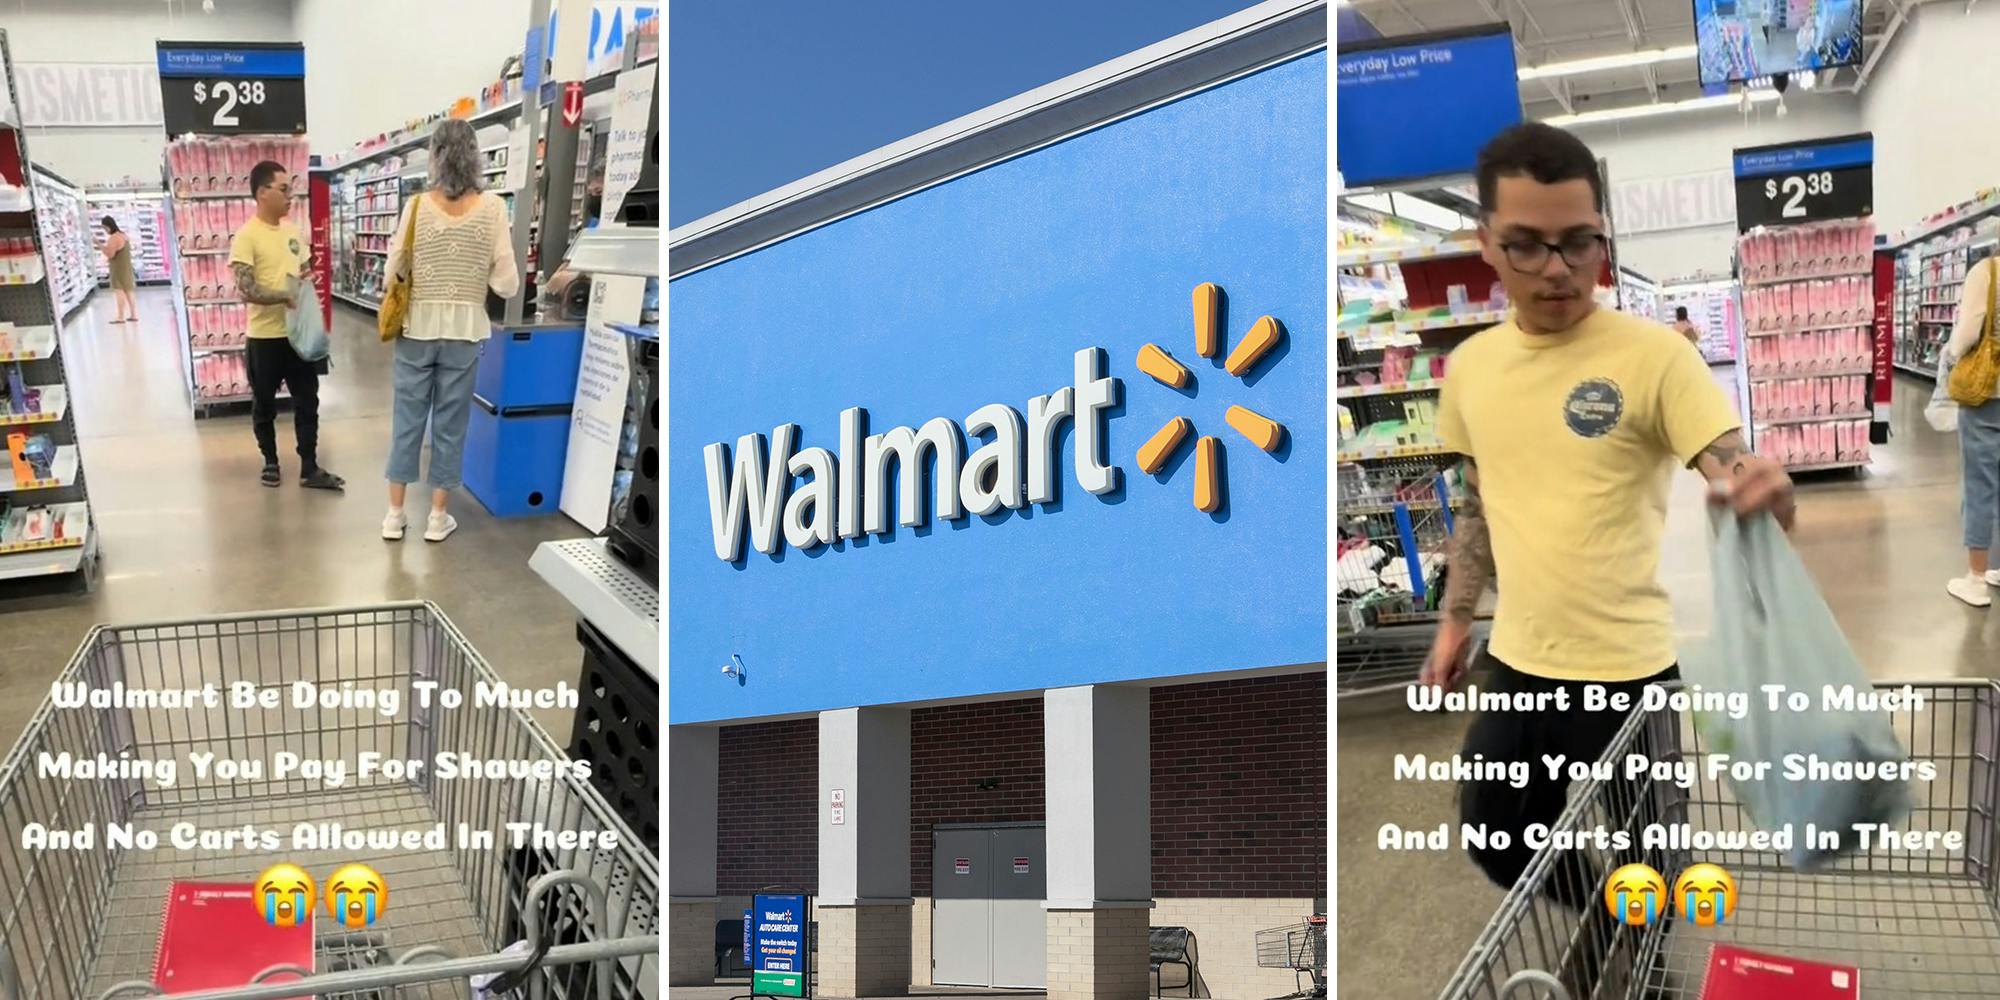 Made me start going to target: Walmart shopper says her cart wasn’t allowed in makeup section, was forced to pay for shavers right then and there